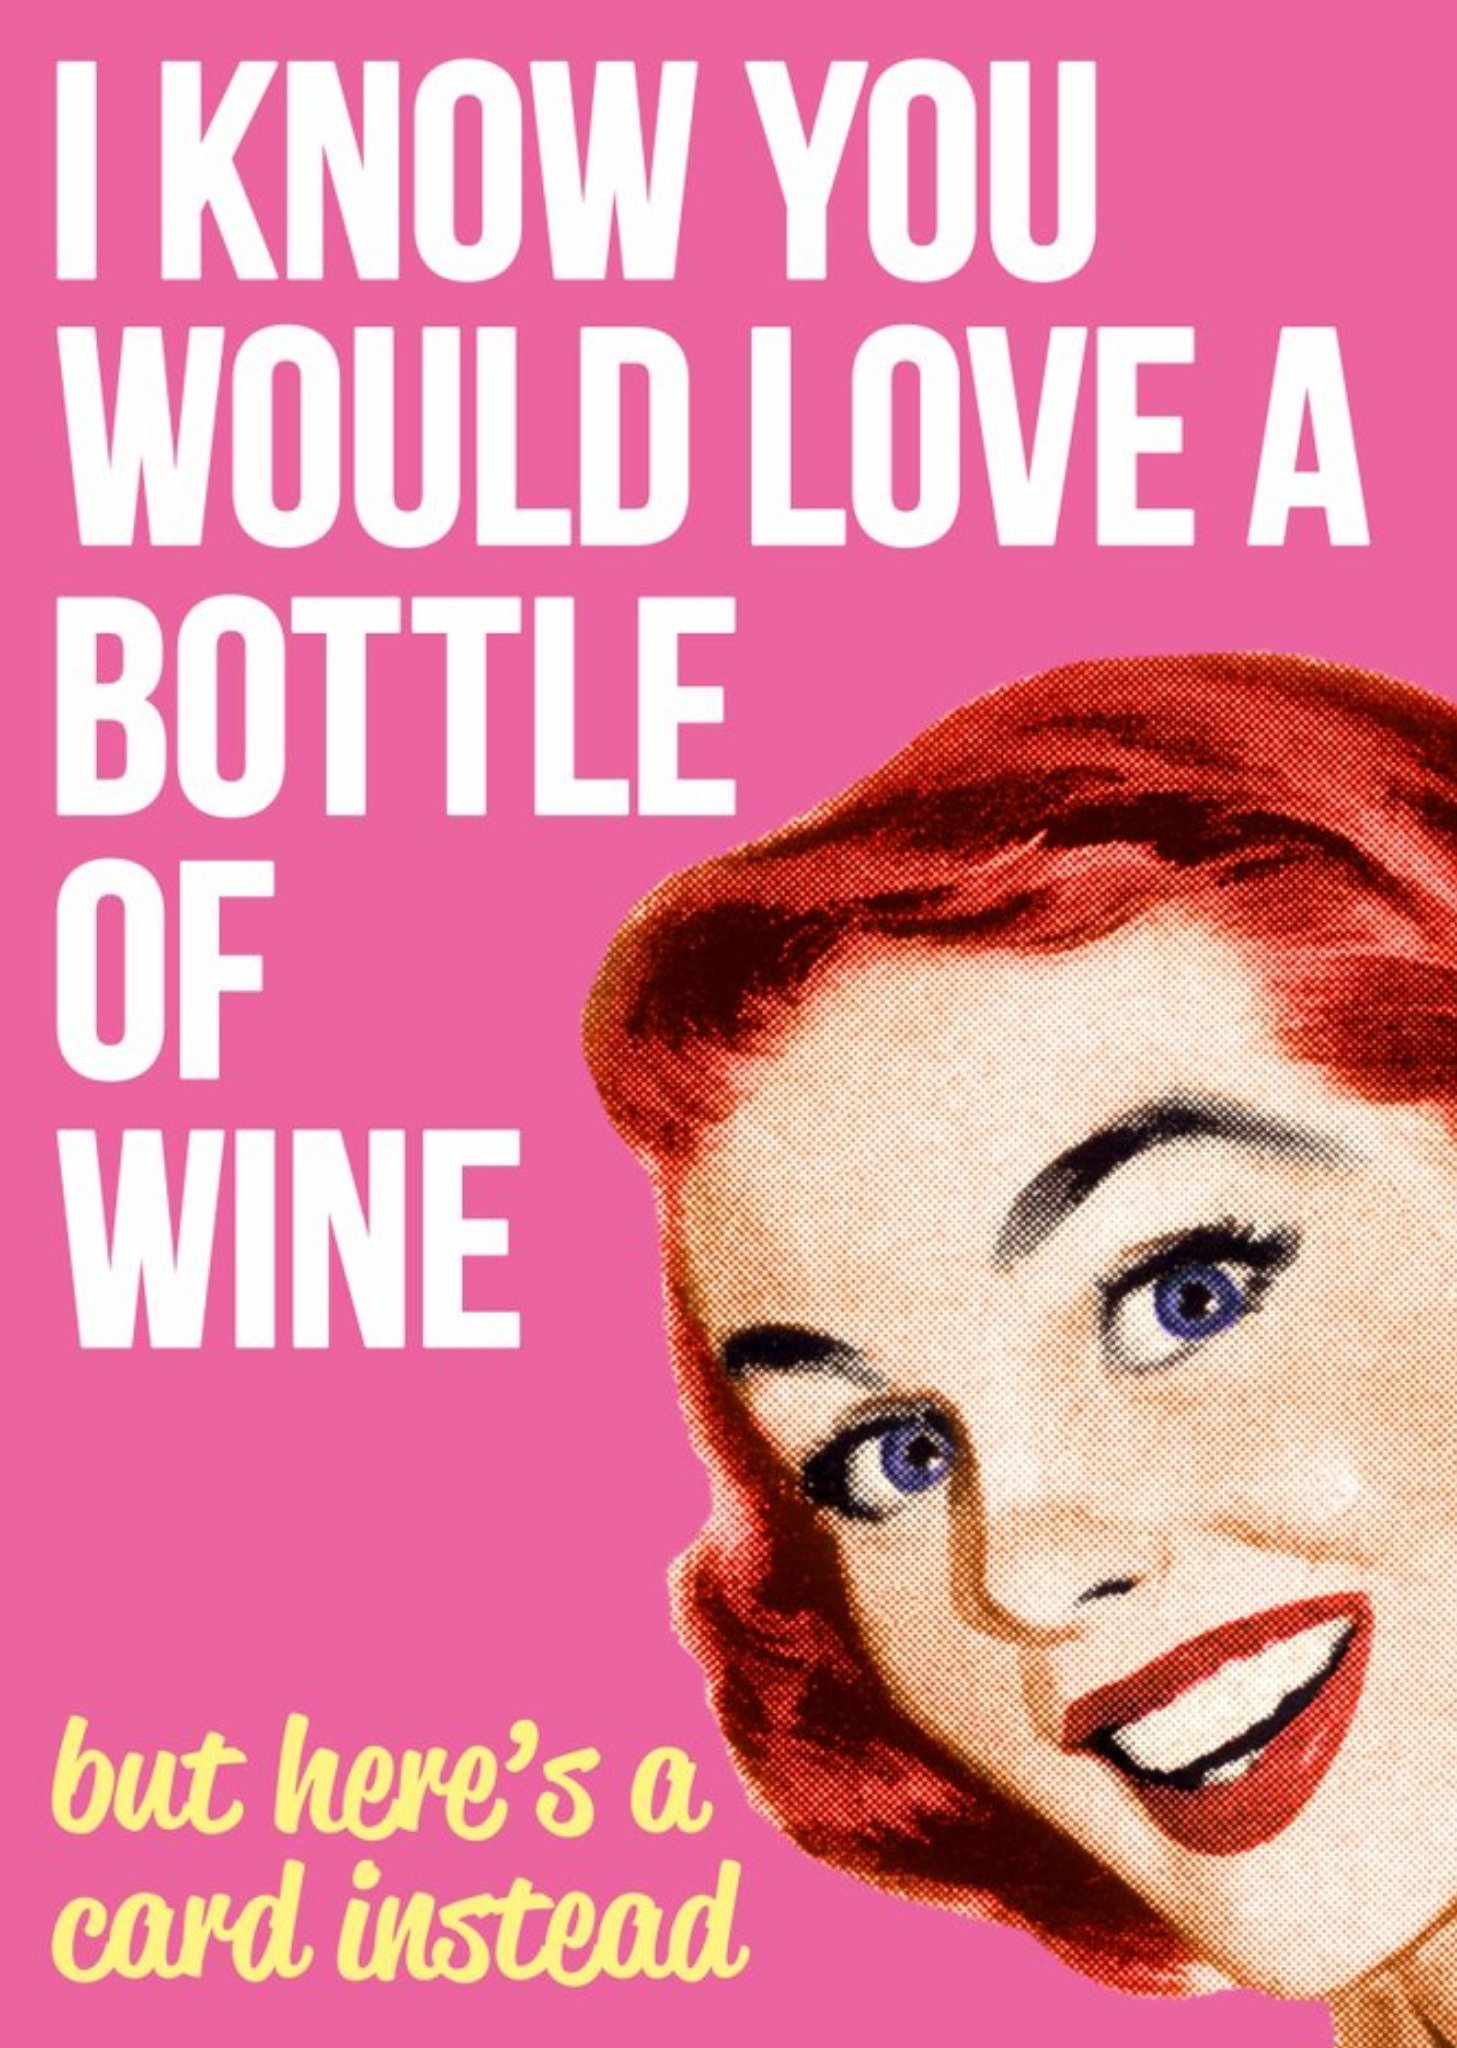 Moonpig I Know You Would Like A Bottle Of Wine Funny Retro Card, Large